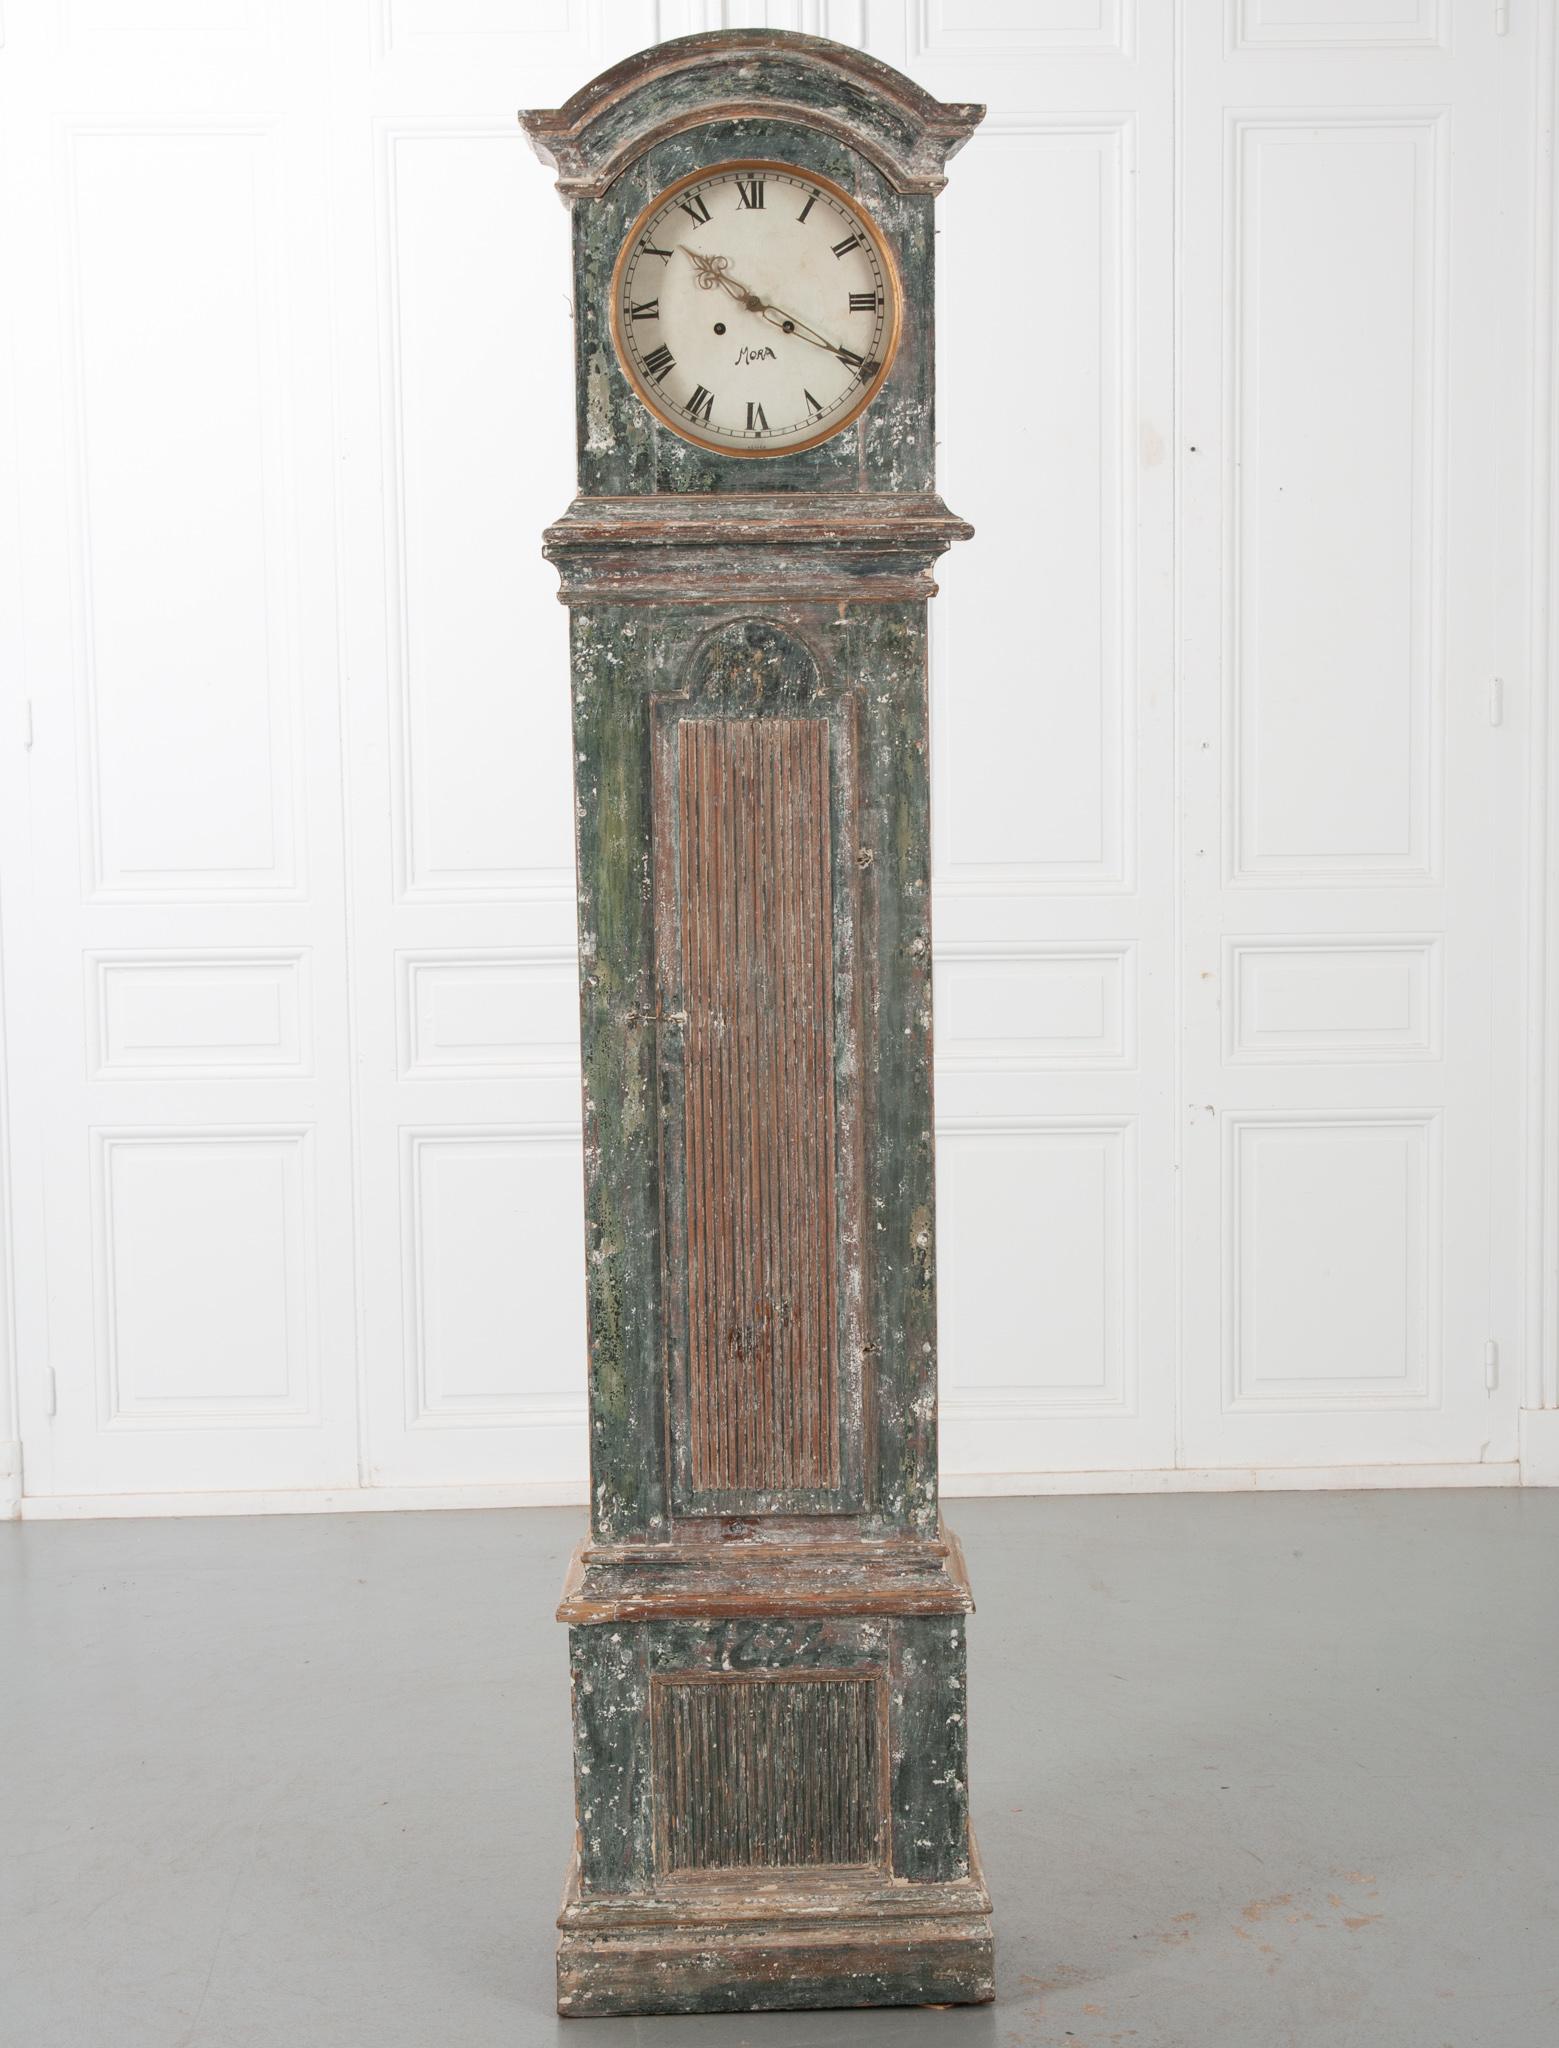 A fantastic example of a Swedish 19th century long case Mora clock! Layers of white and dark greenish blue paint cover the whole, giving it a fantastic patina. A bonnet shaped crown tops the clock, nicely complimenting the circular clock face.